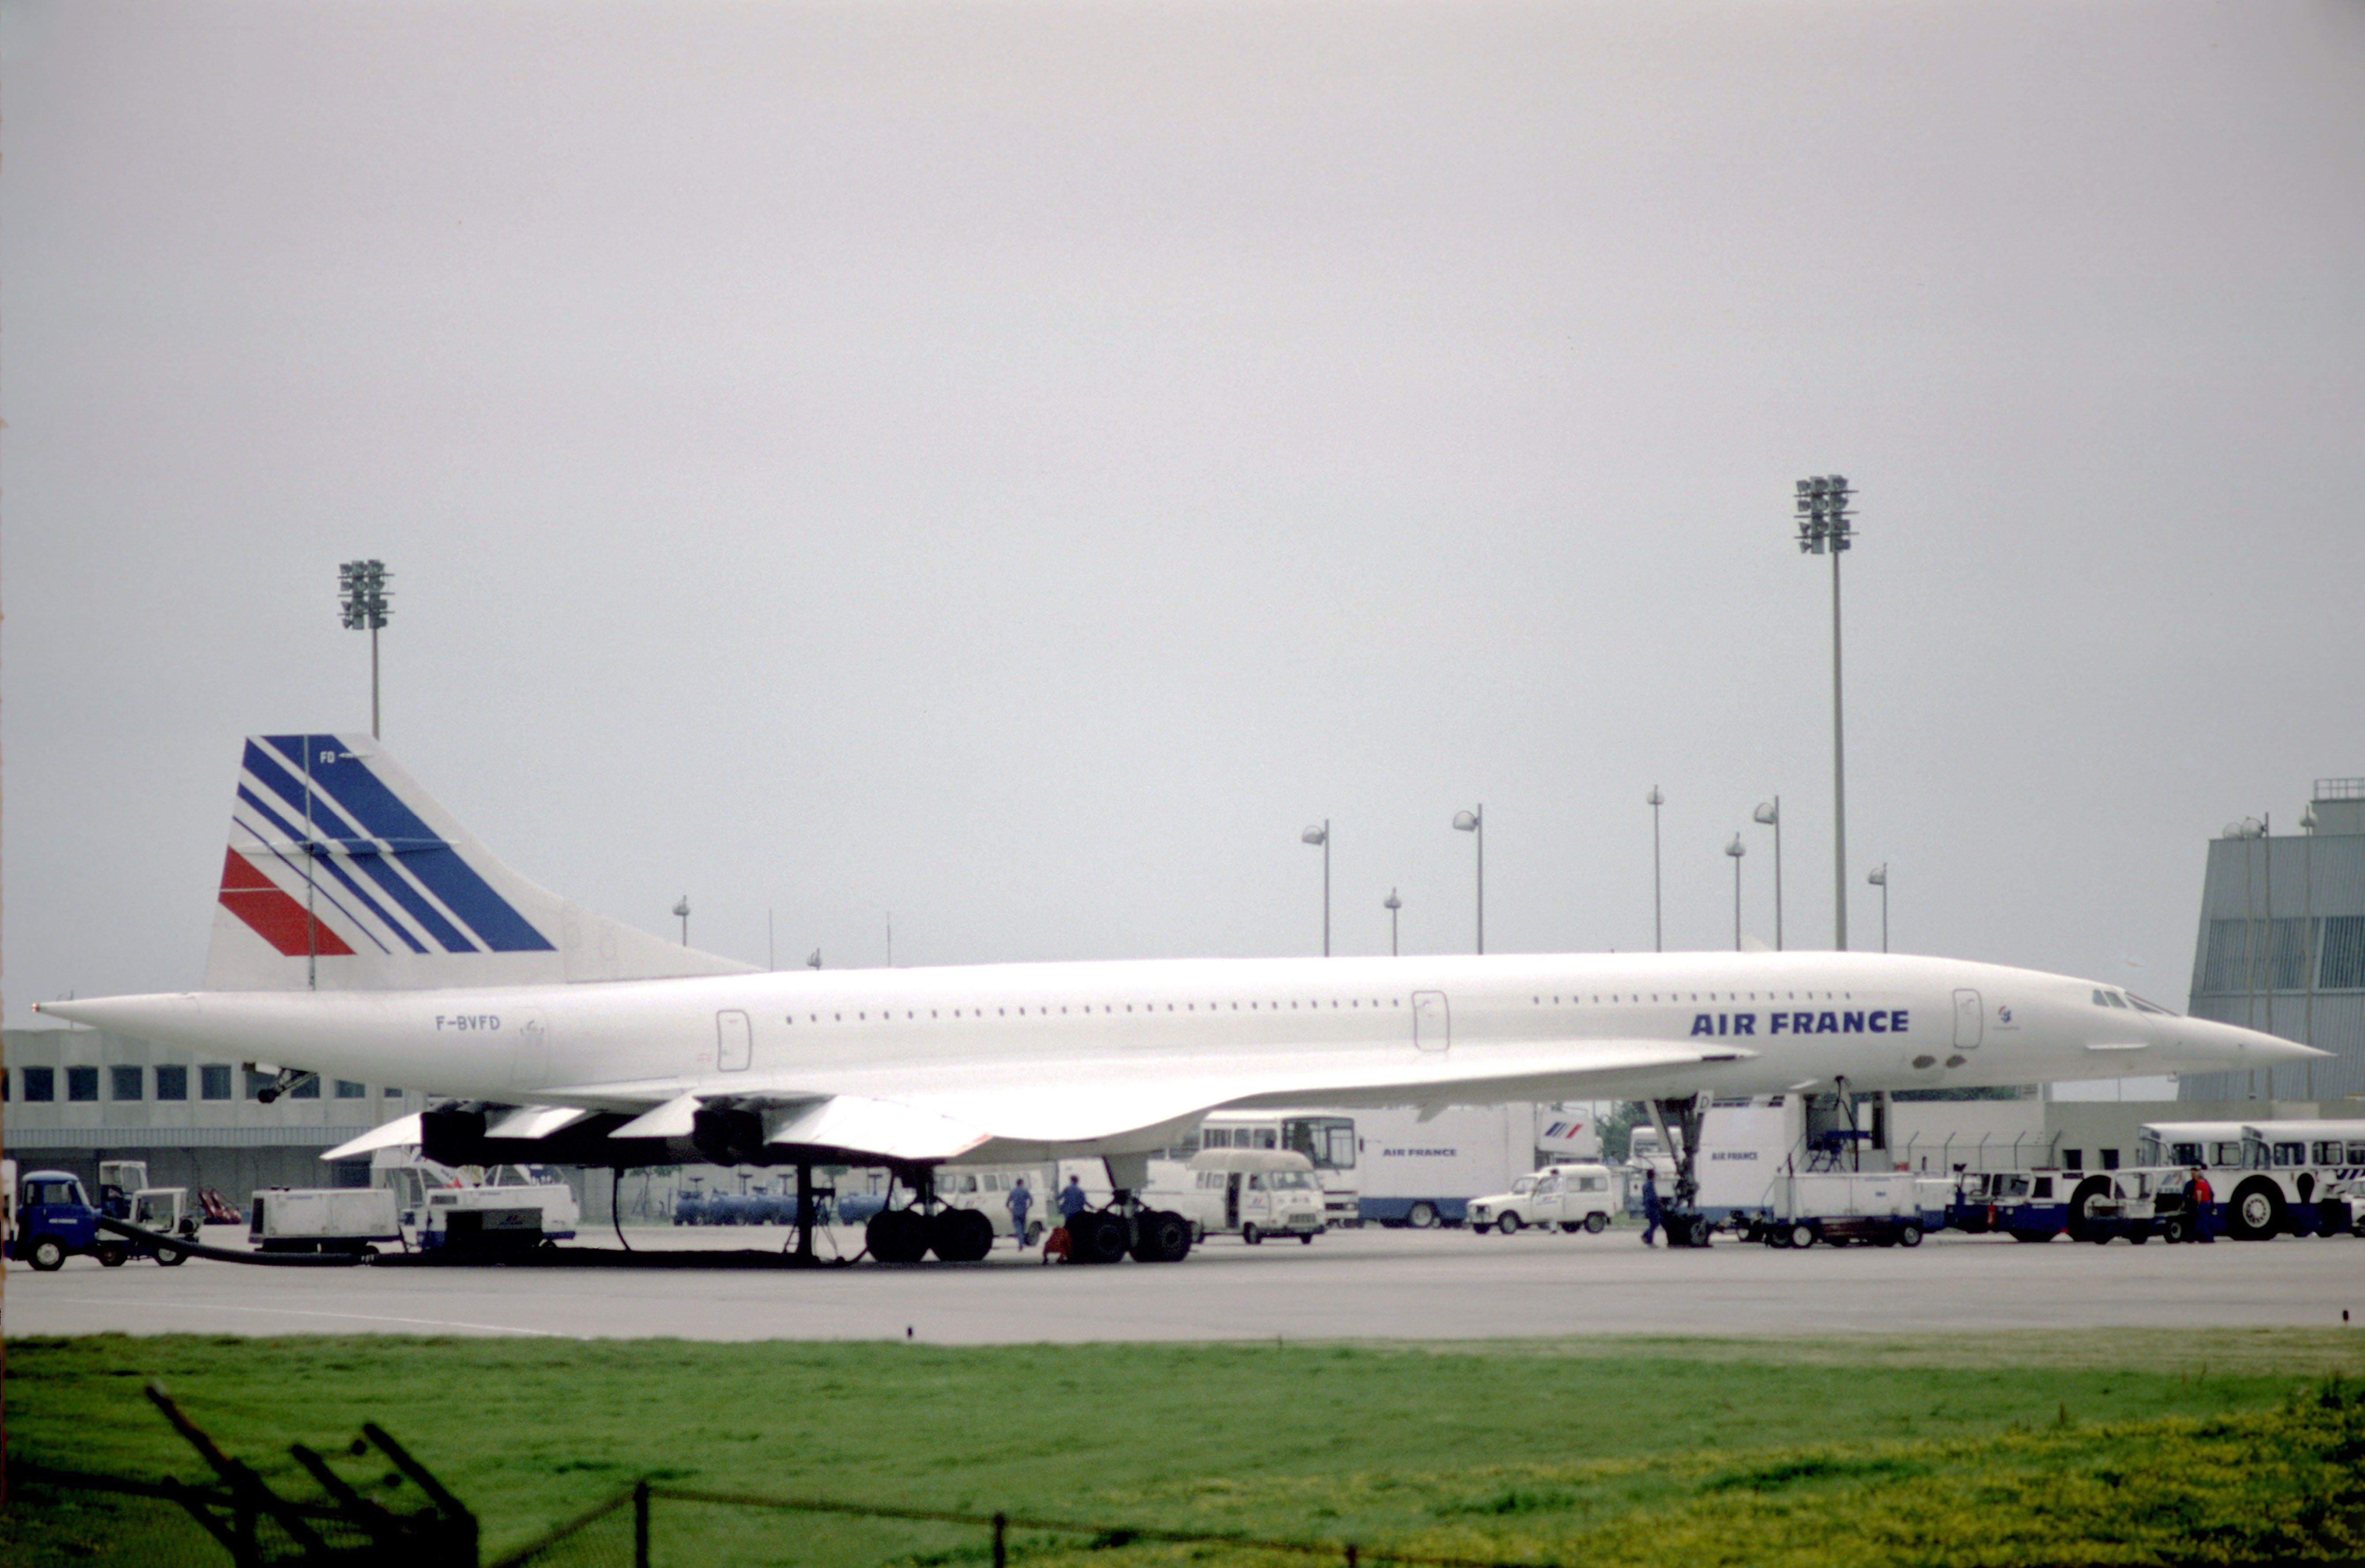 An Air France Concorde on an airport apron.